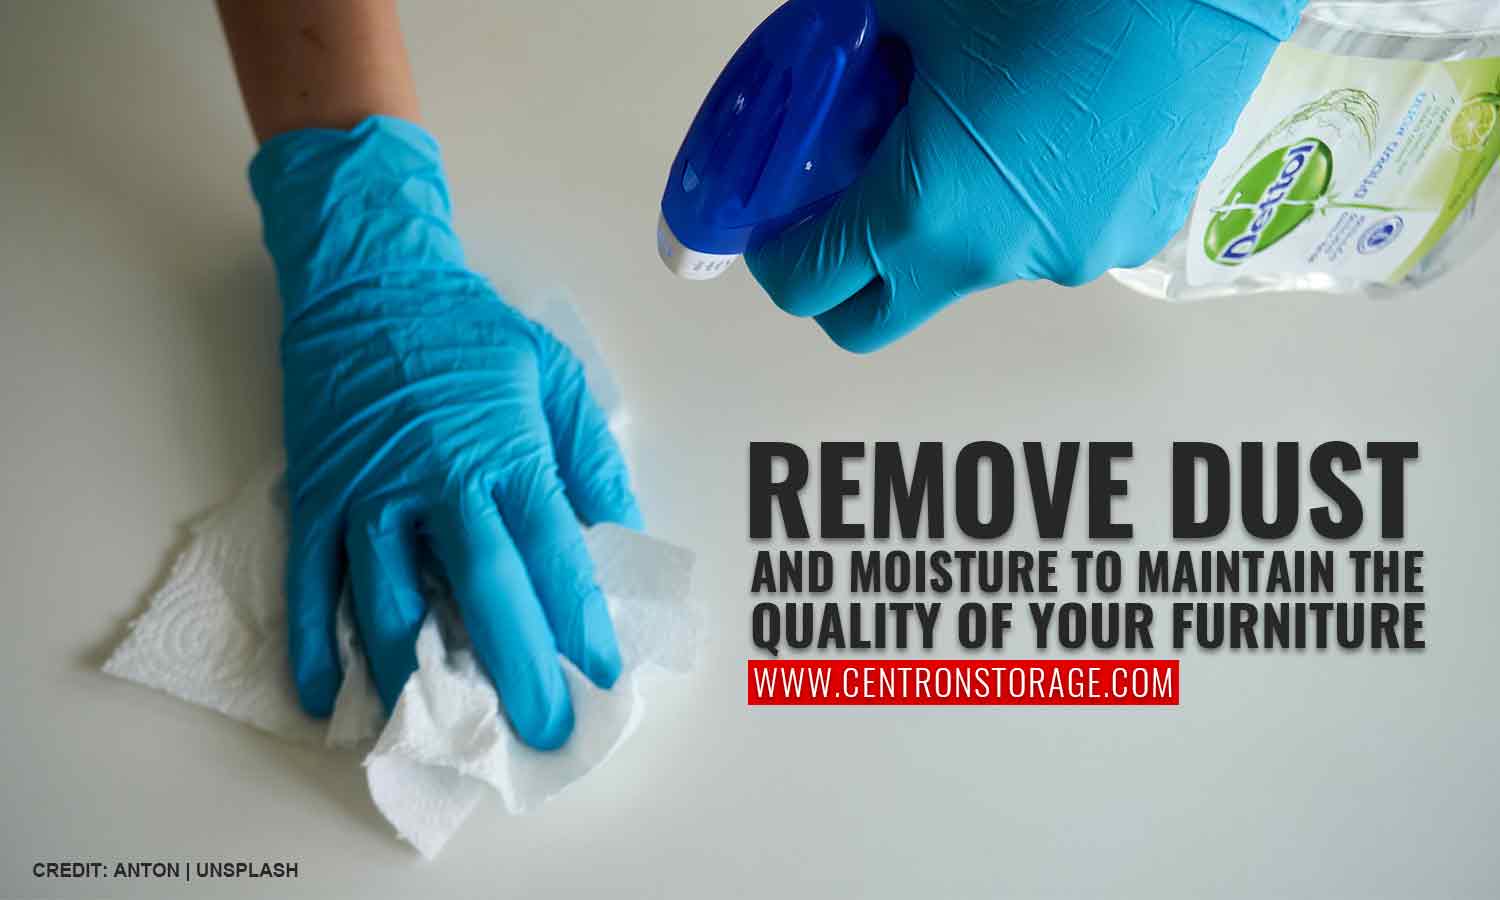 Remove dust and moisture to maintain the quality of your furniture